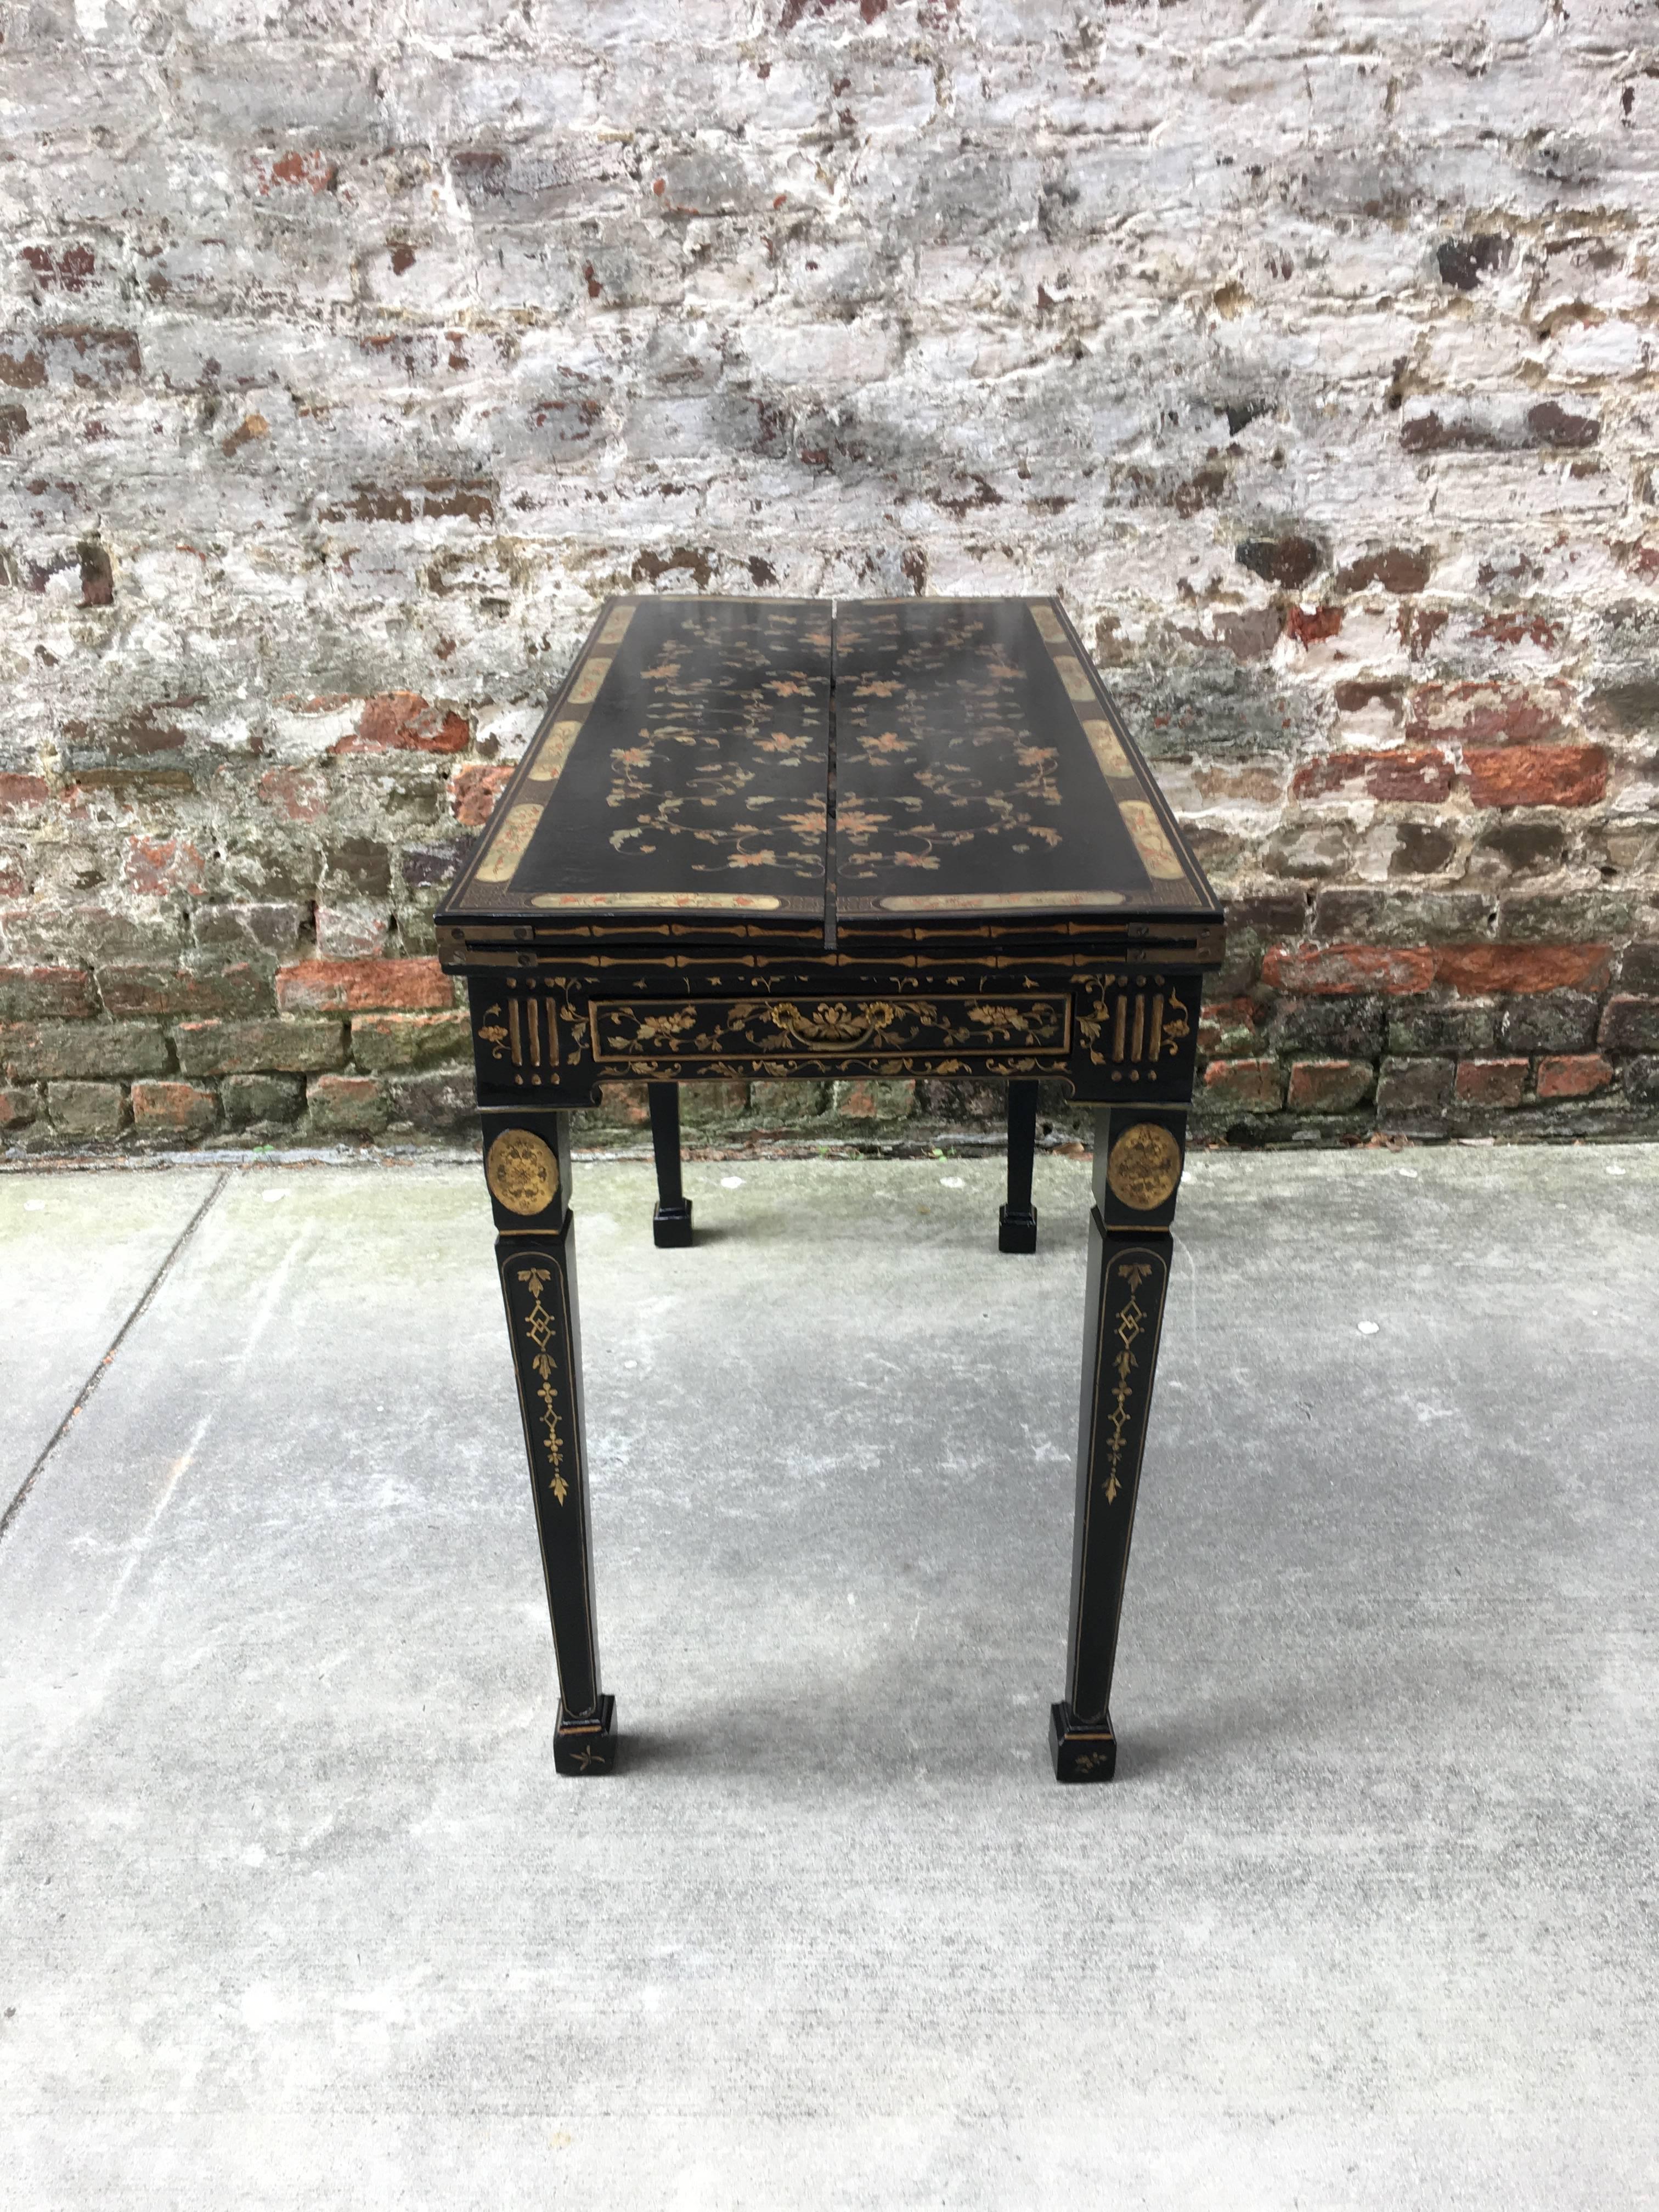 

CHINESE EXPORT LACQUERED GAMING TABLE, CIRCA 1805 in the neoclassical style, with a rectangular top with two hinged leaves opening to a playing surface with chip and candle indentations and a reversible backgammon/chessboard over a storage well